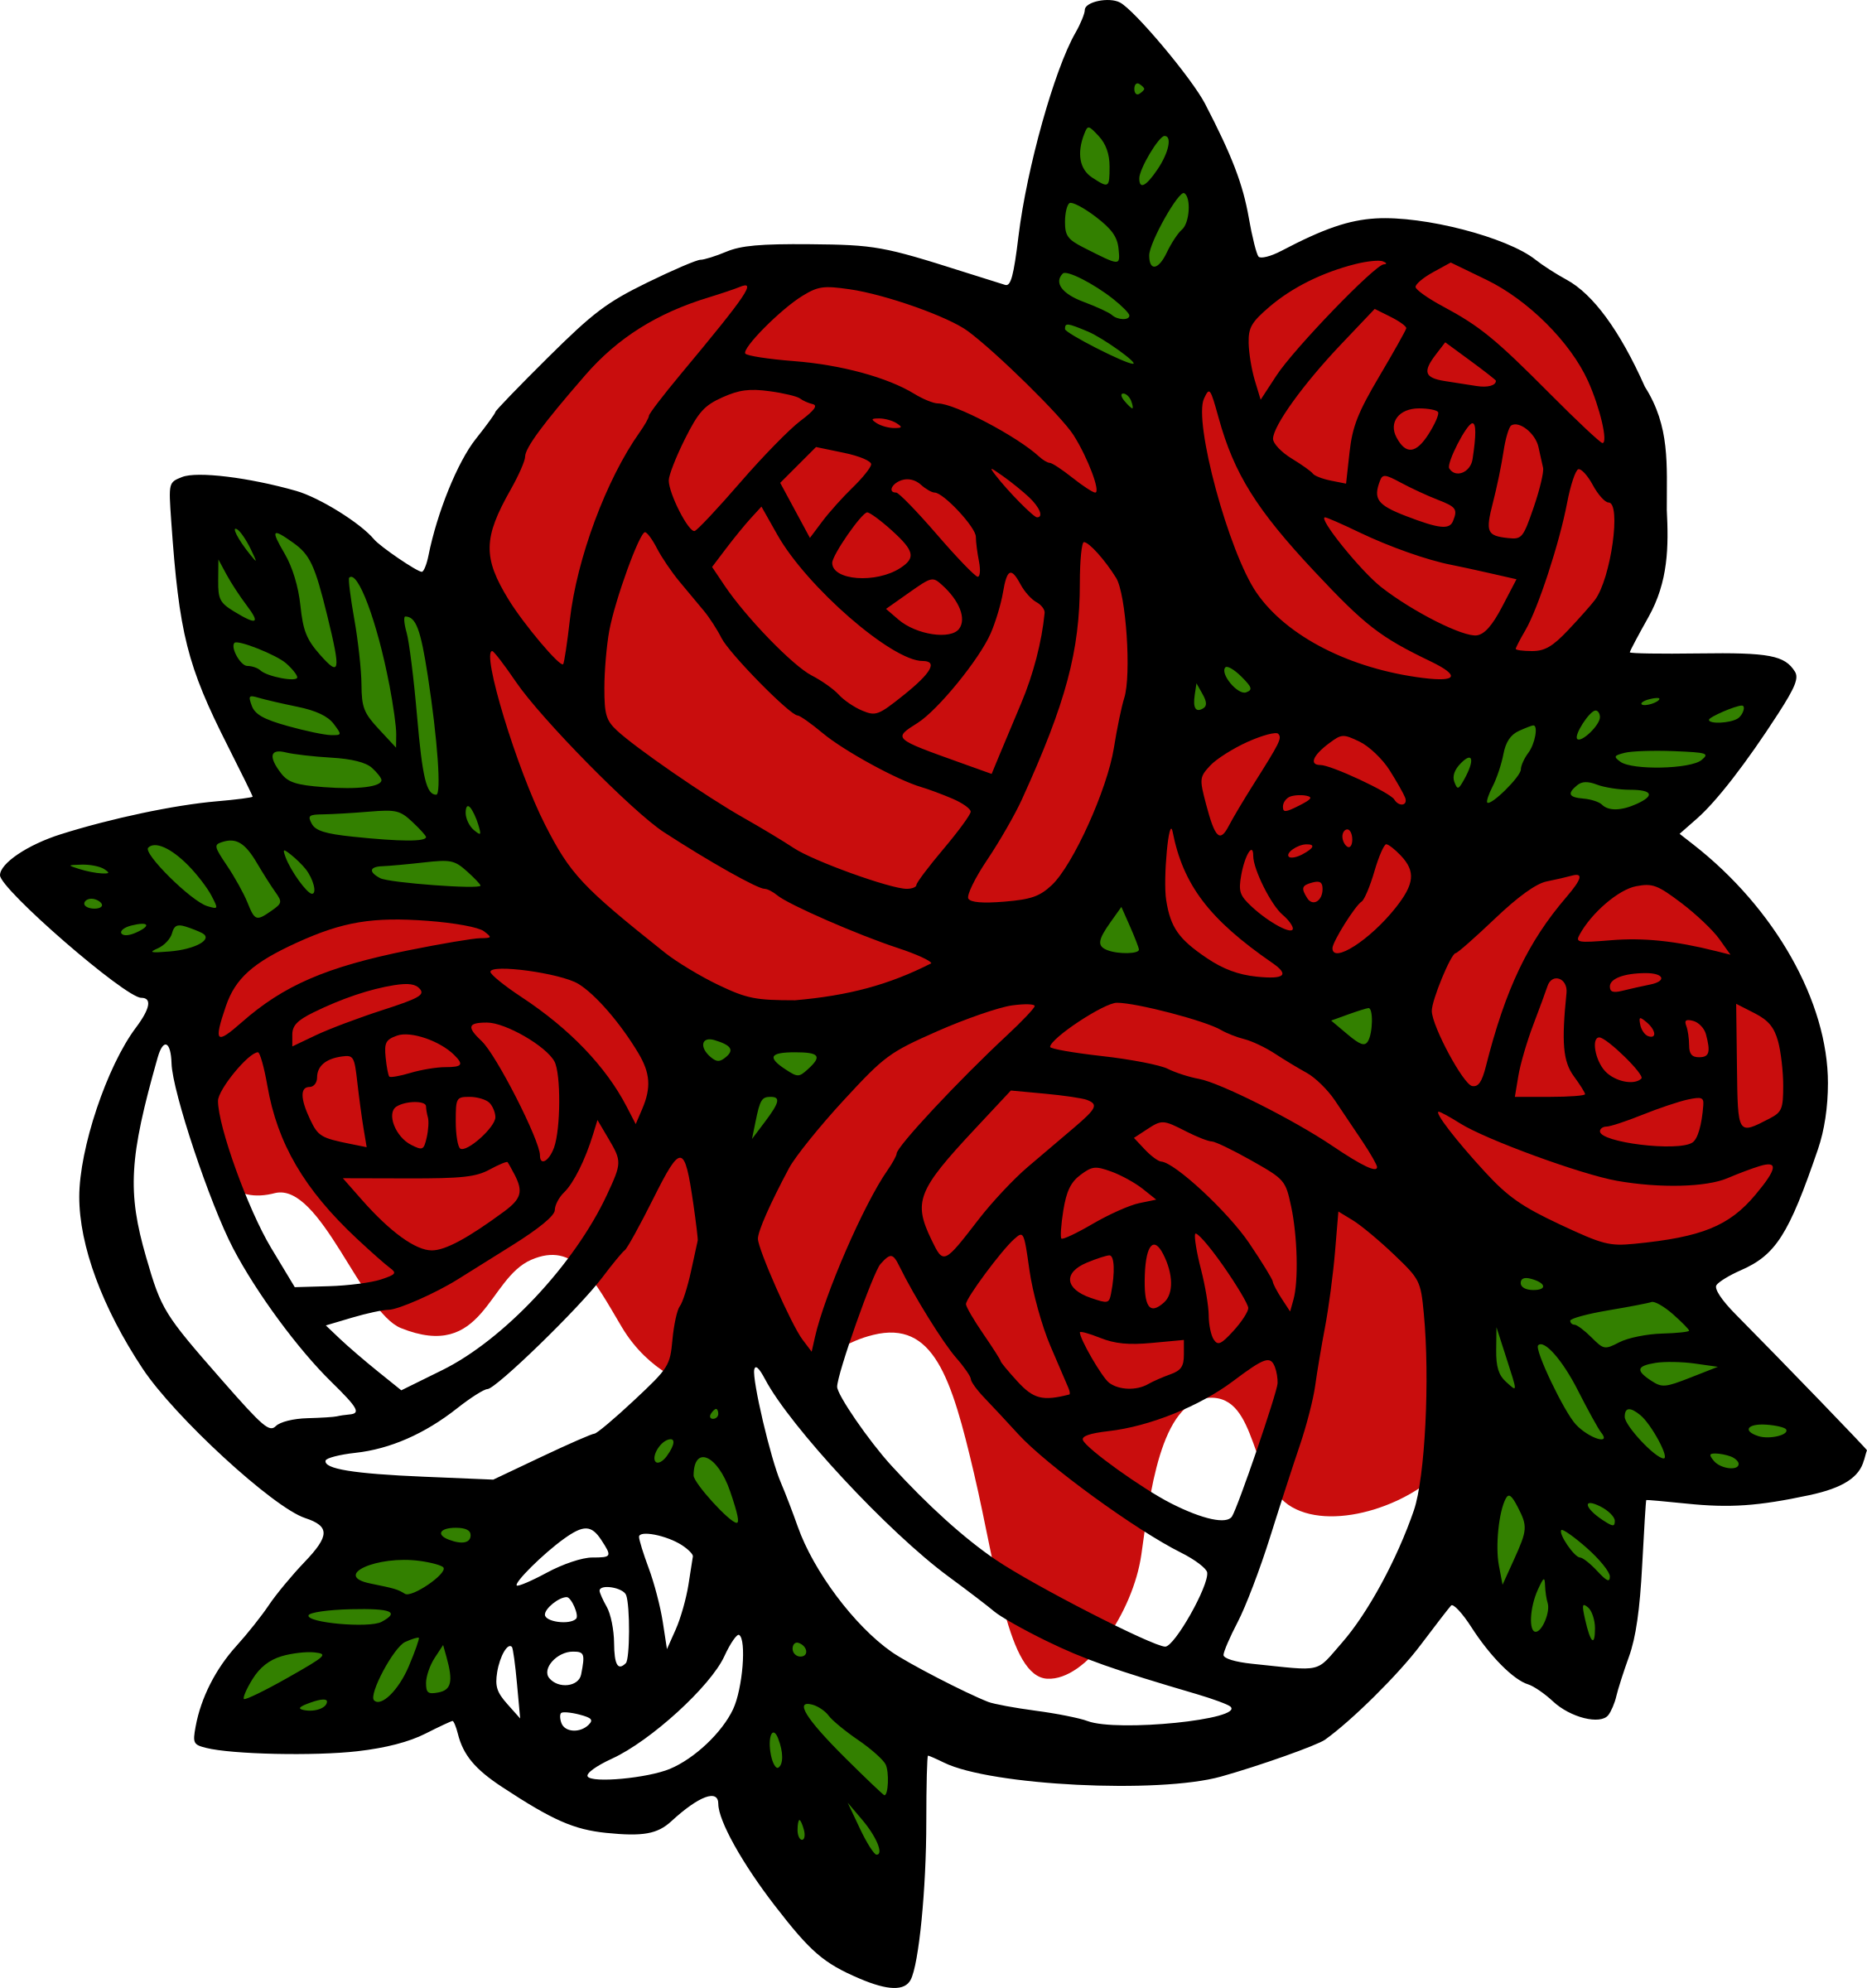 A Group Of Red Roses